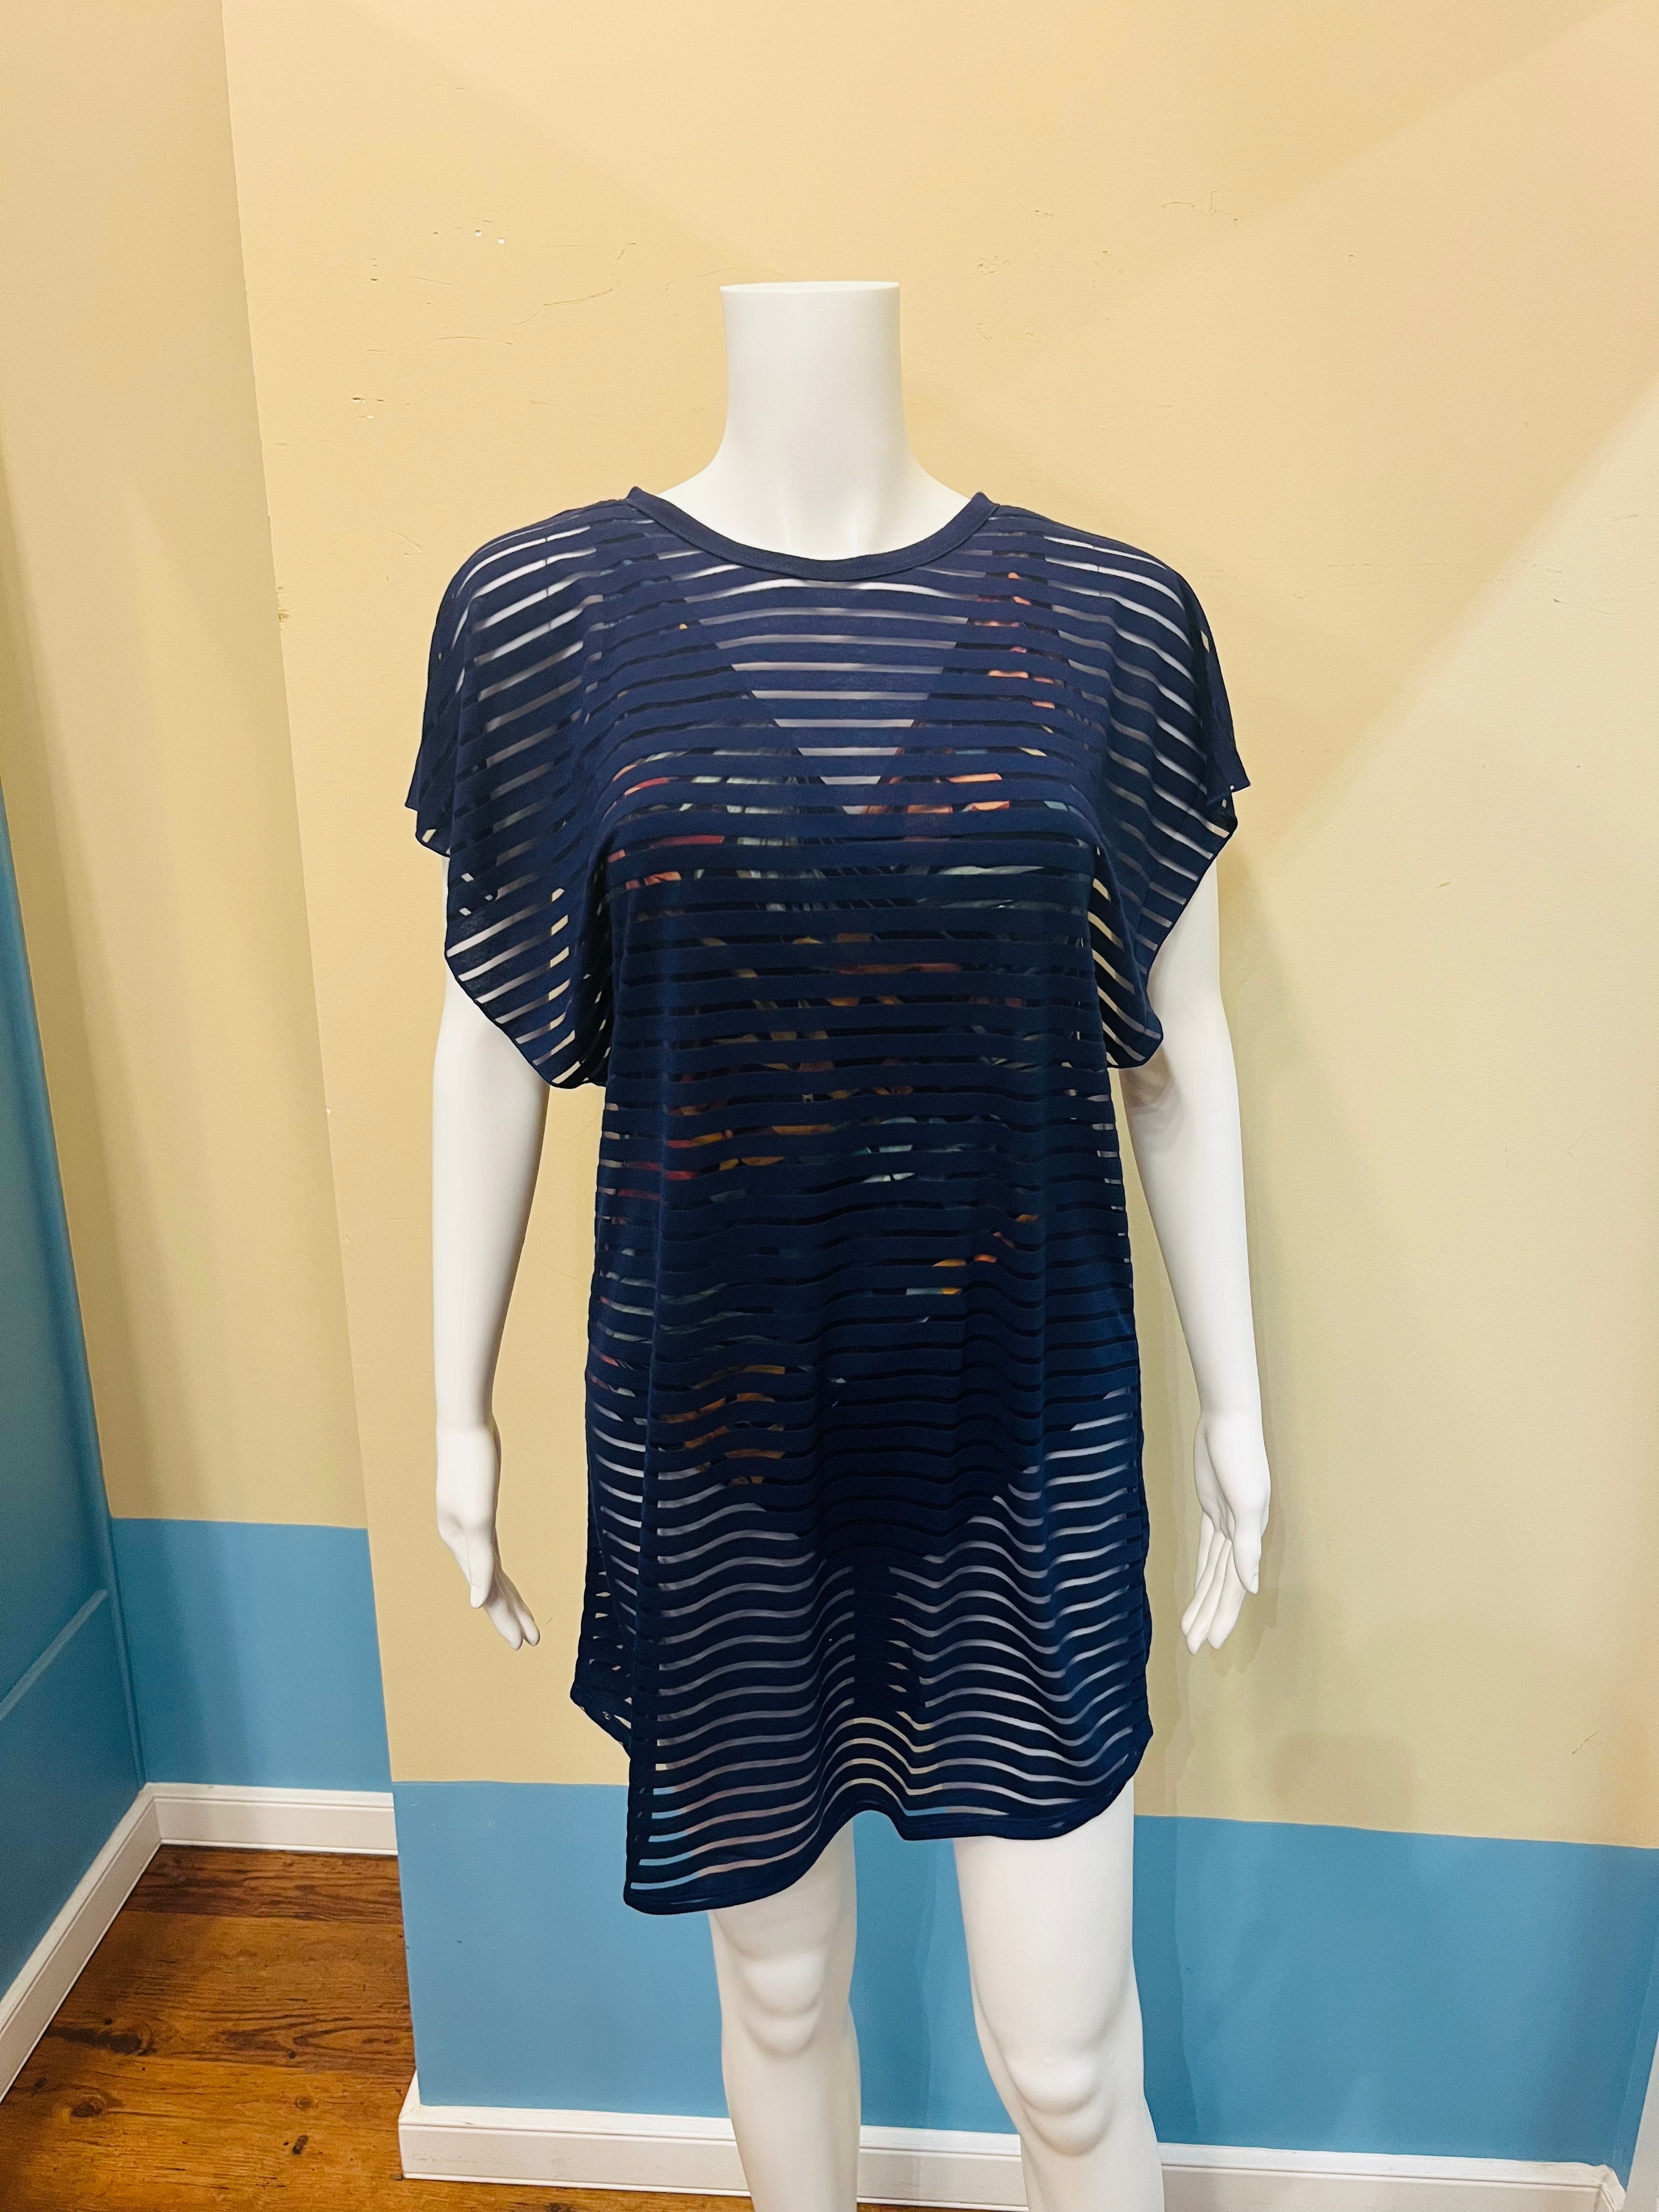 This easy breezy bat wing tunic swimsuit cover up up is so light weight its perfect for those hot summer days. The fabric is soft and feel luxurious against you skin. Wear this classic take on a cover up poolside, lounging on the cruise deck. Bon voyage!